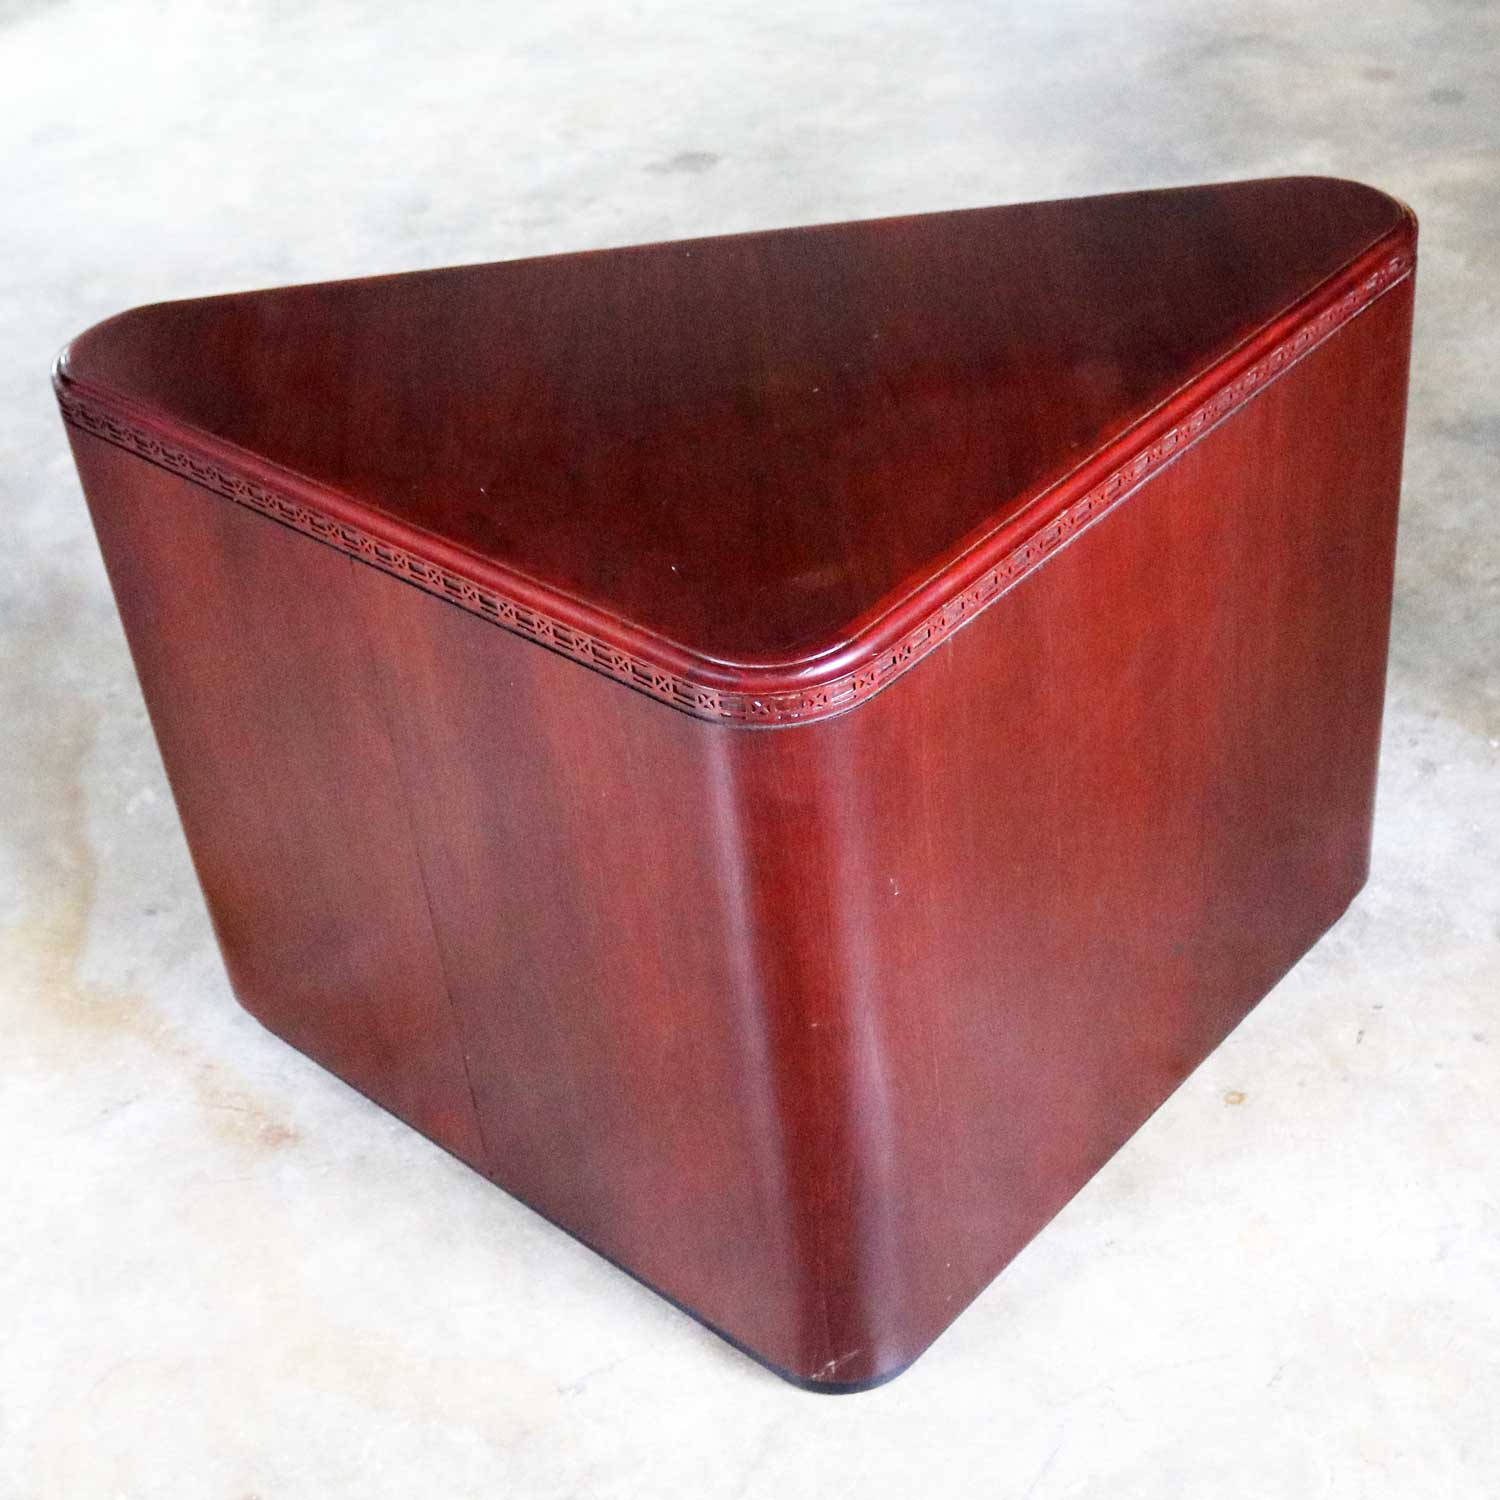 Vintage Pair of Mahogany Triangular End Tables or Pedestals